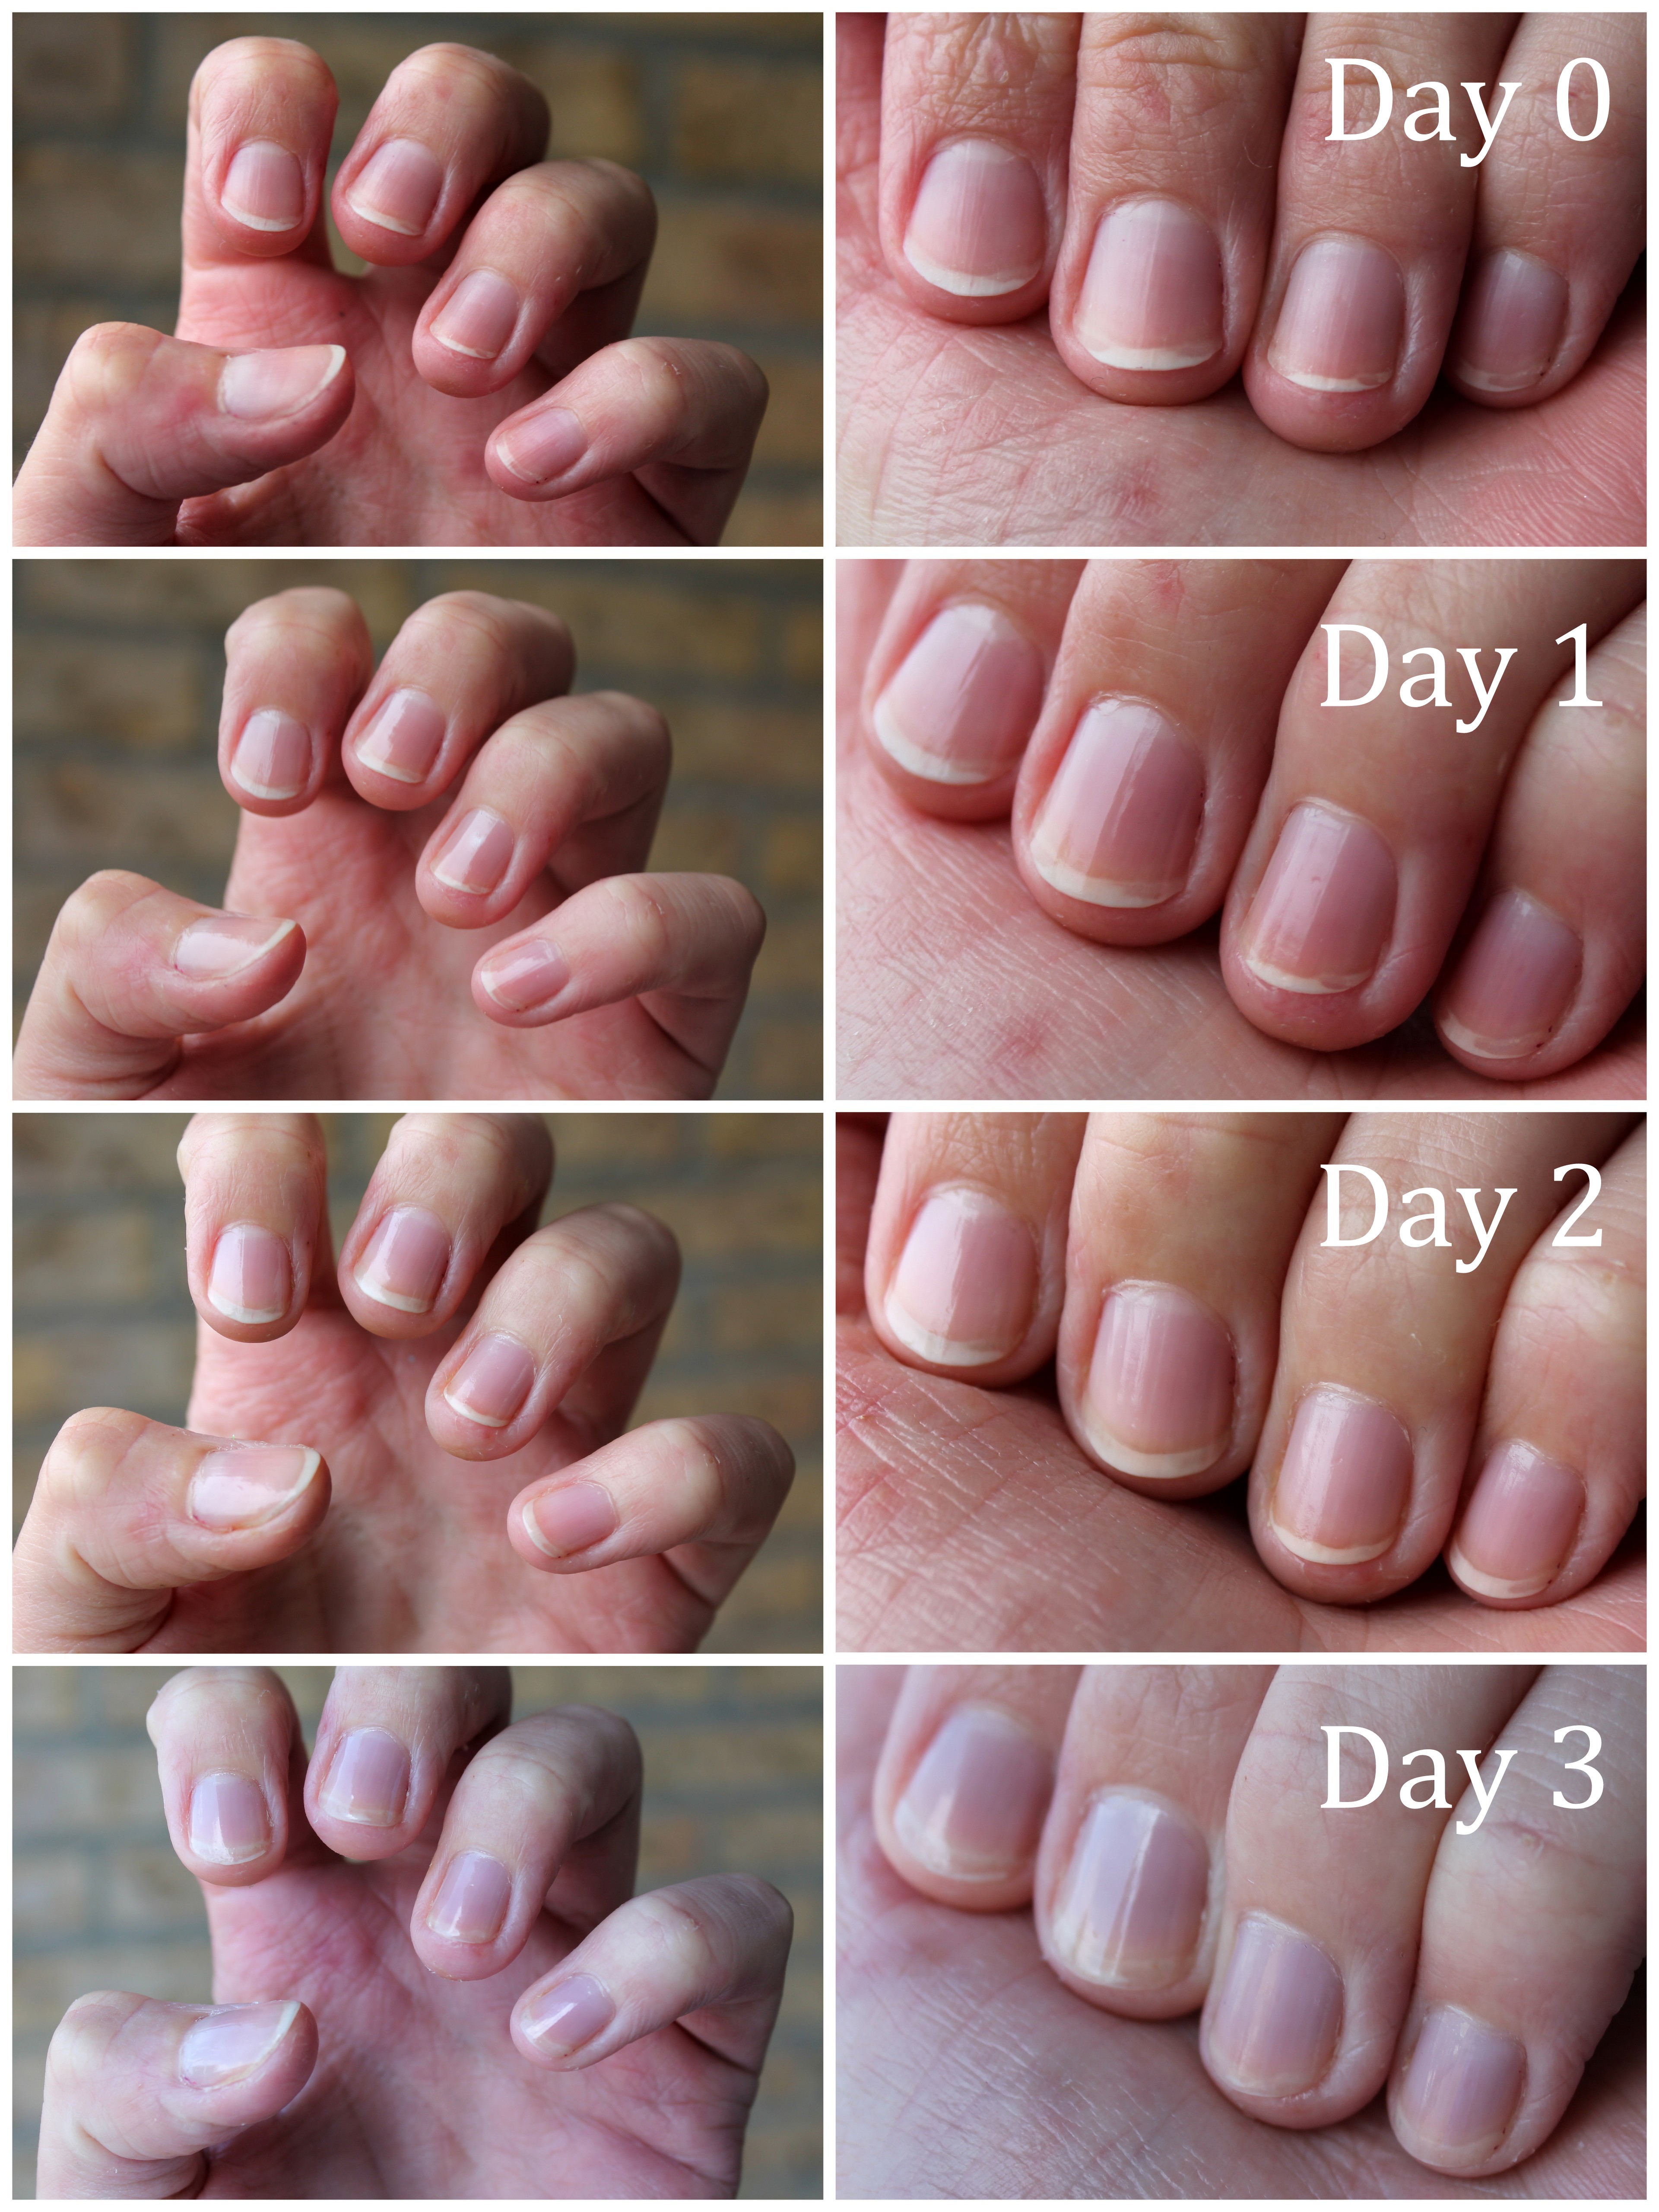 Remarkable Fast Nail Regrowth After Surgical Removal